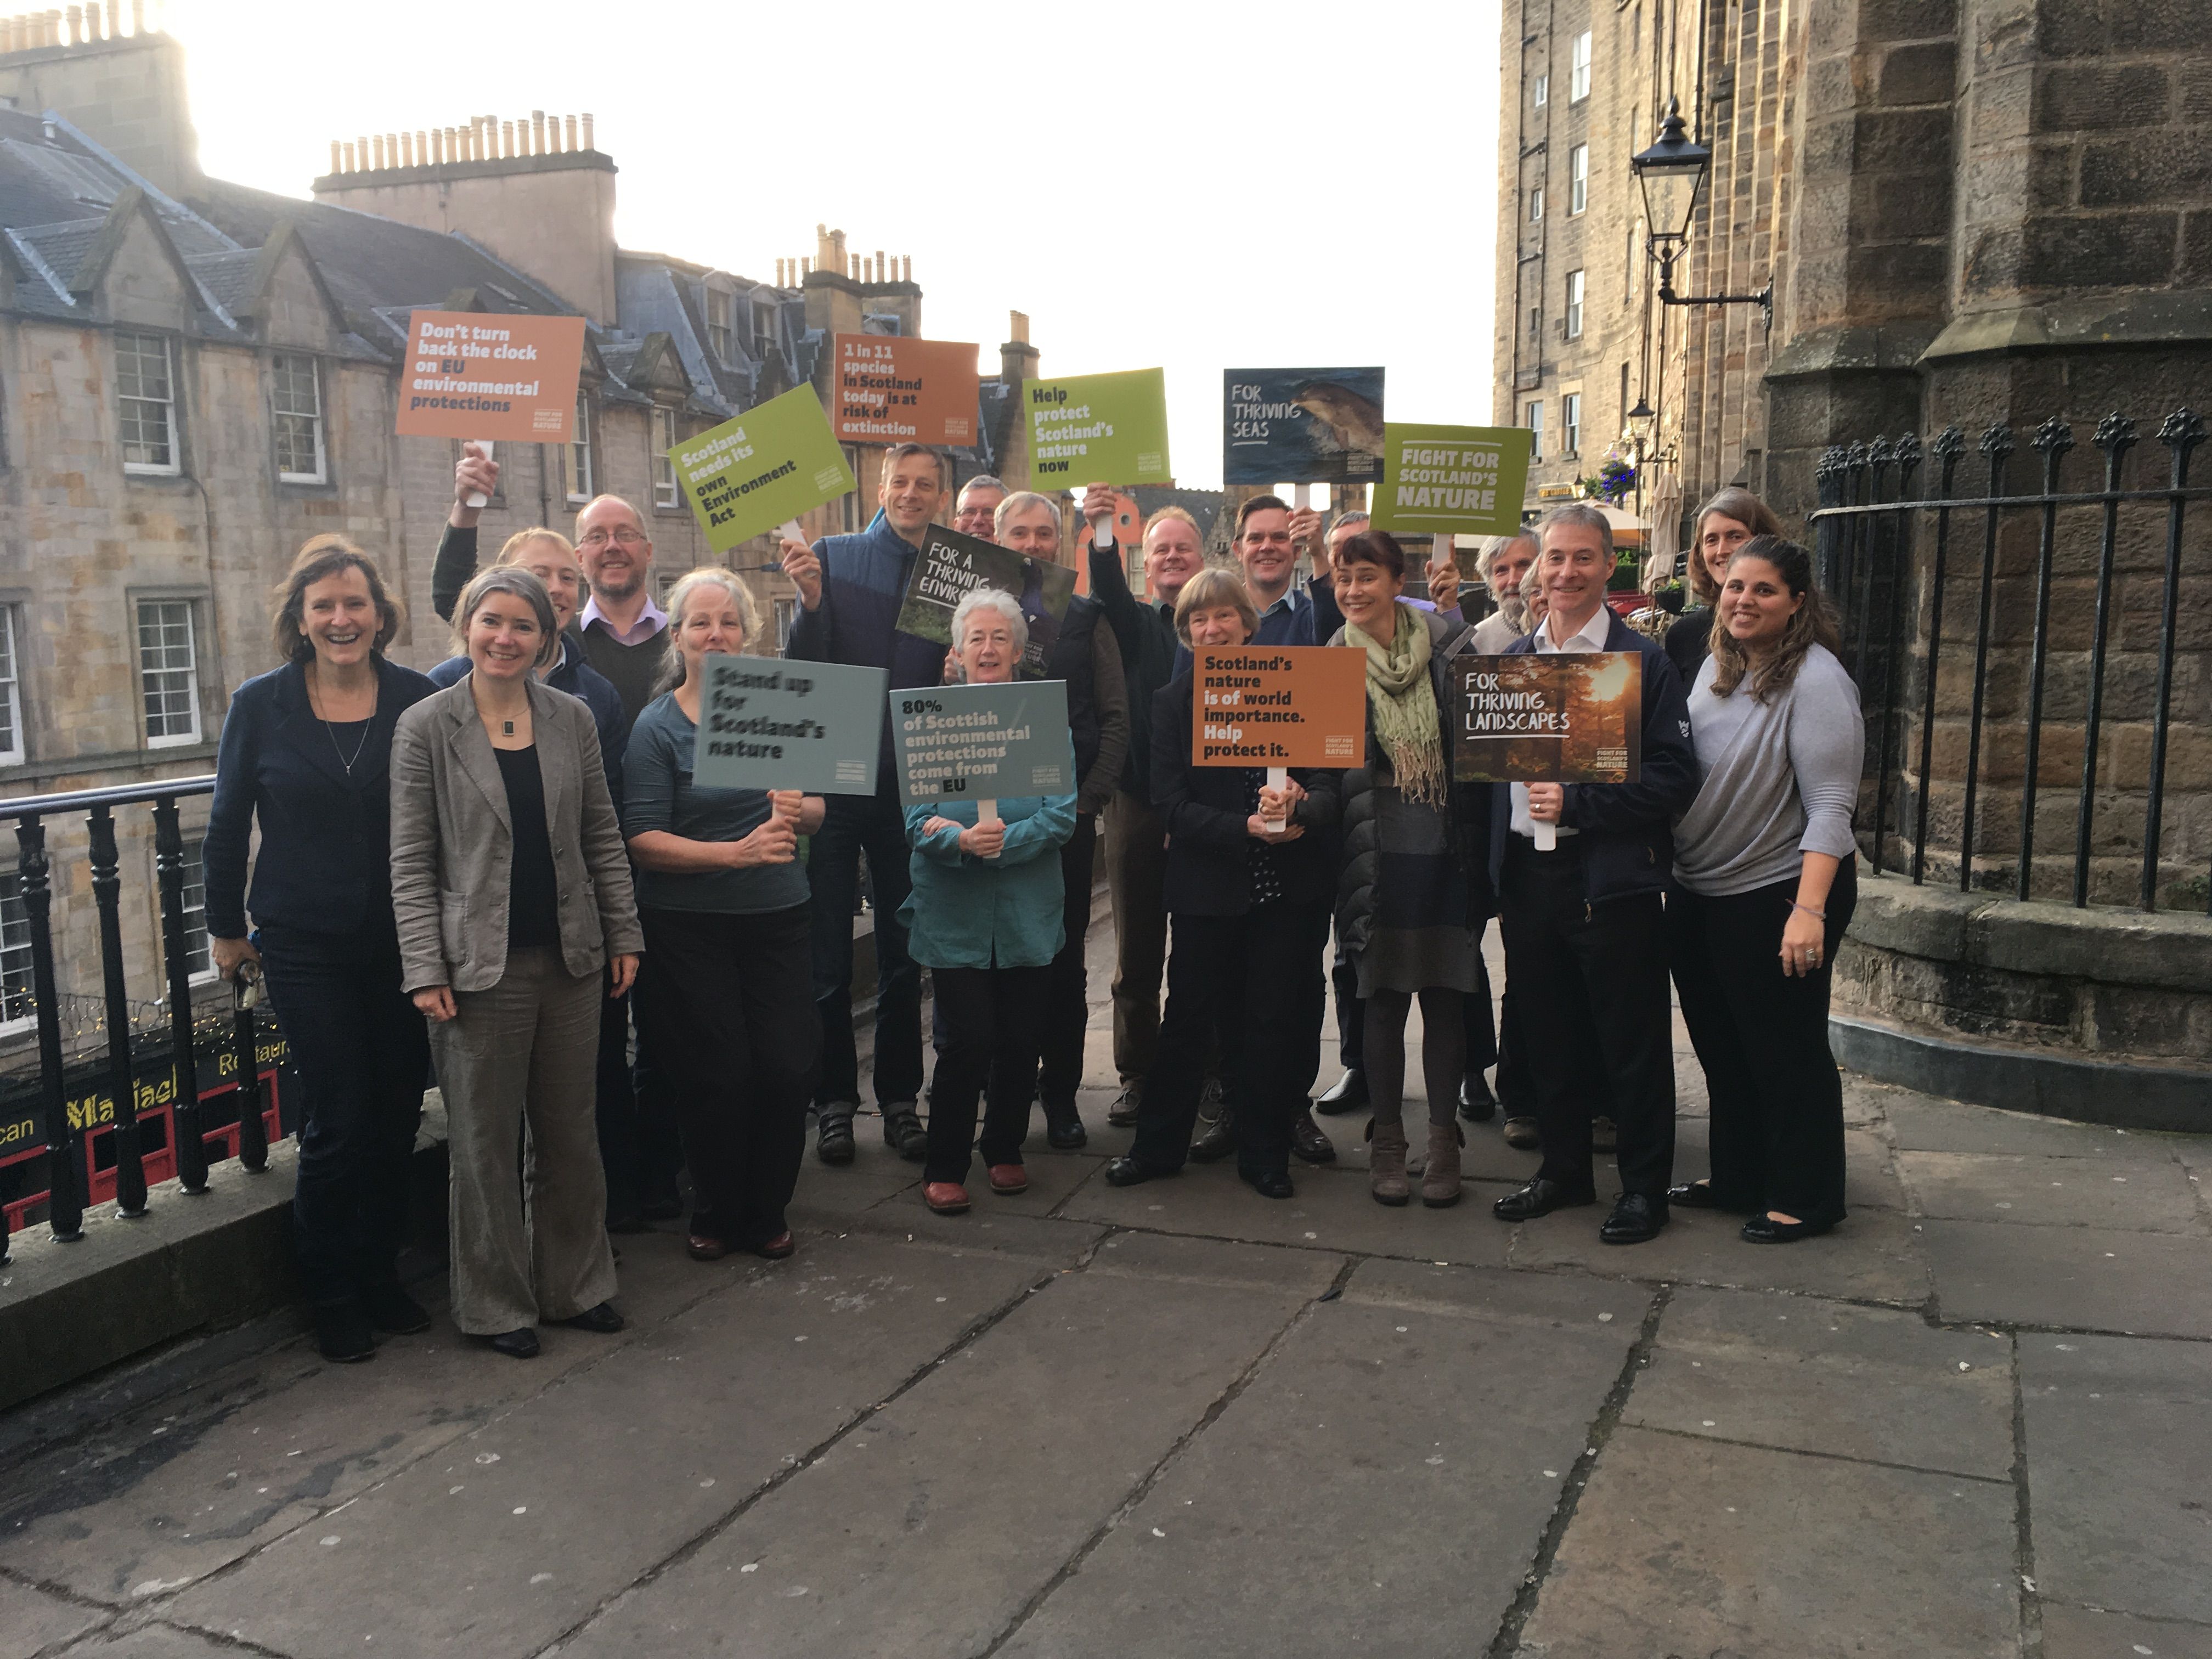 This is an image of Scotlink members with banners outside in Edinburgh